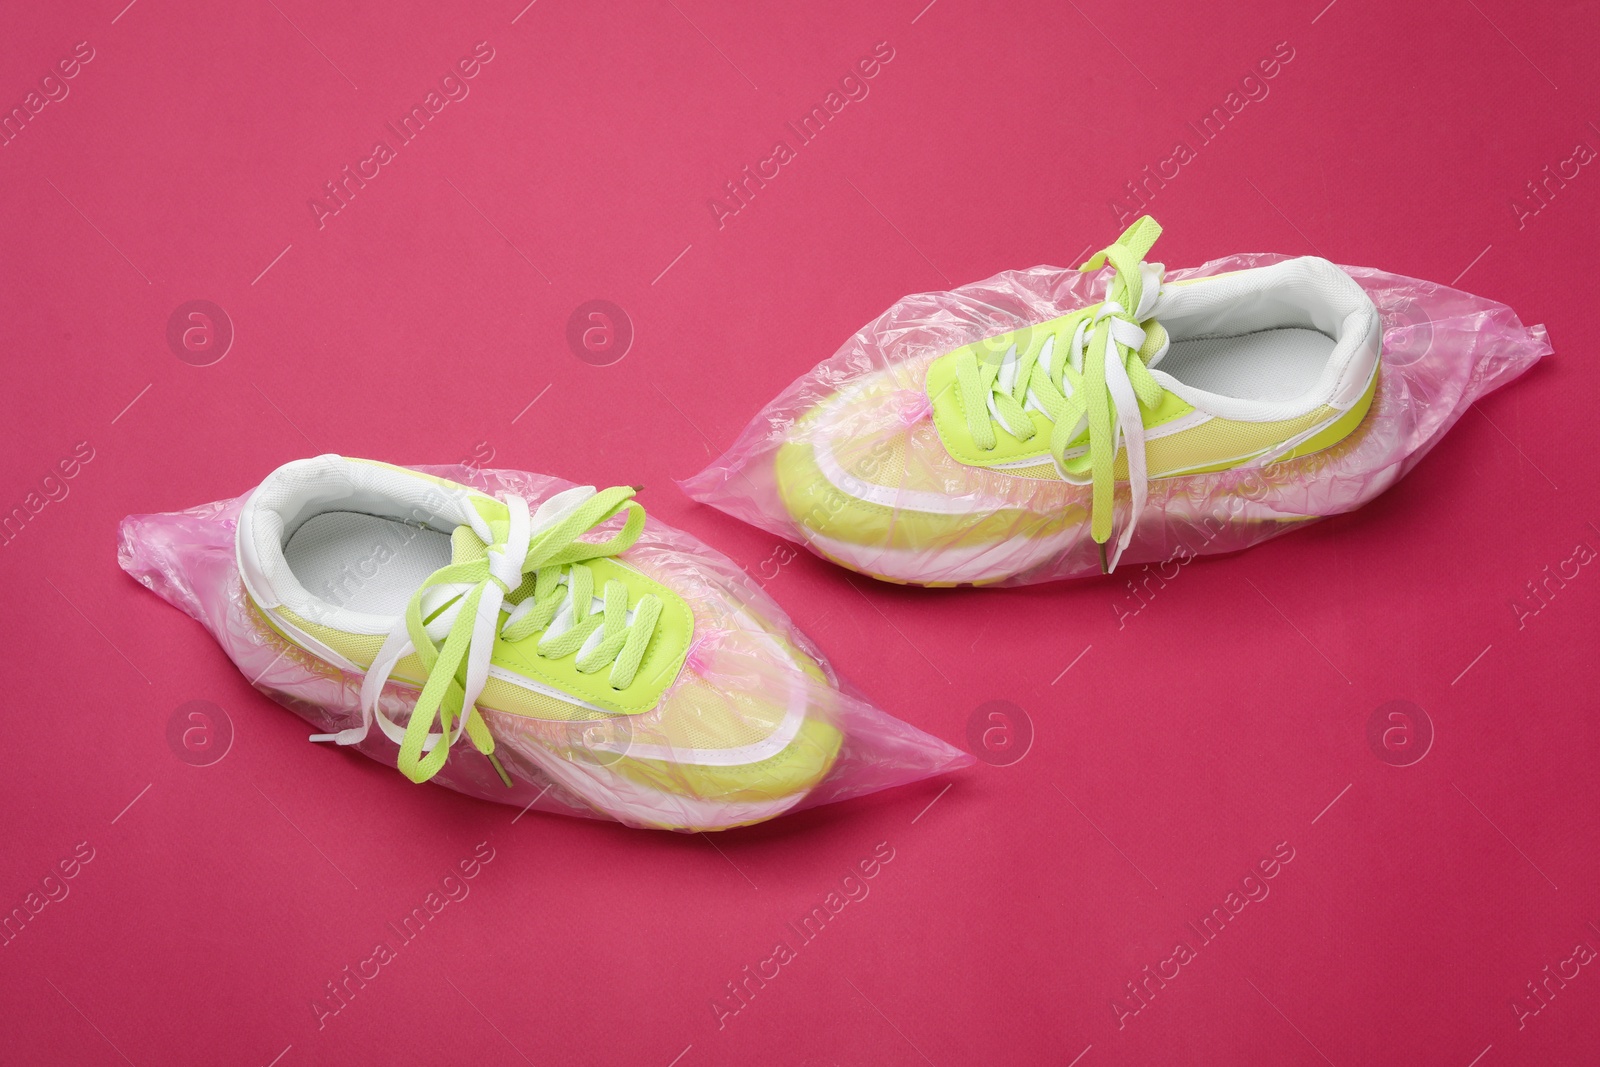 Photo of Sneakers in shoe covers on pink background, above view